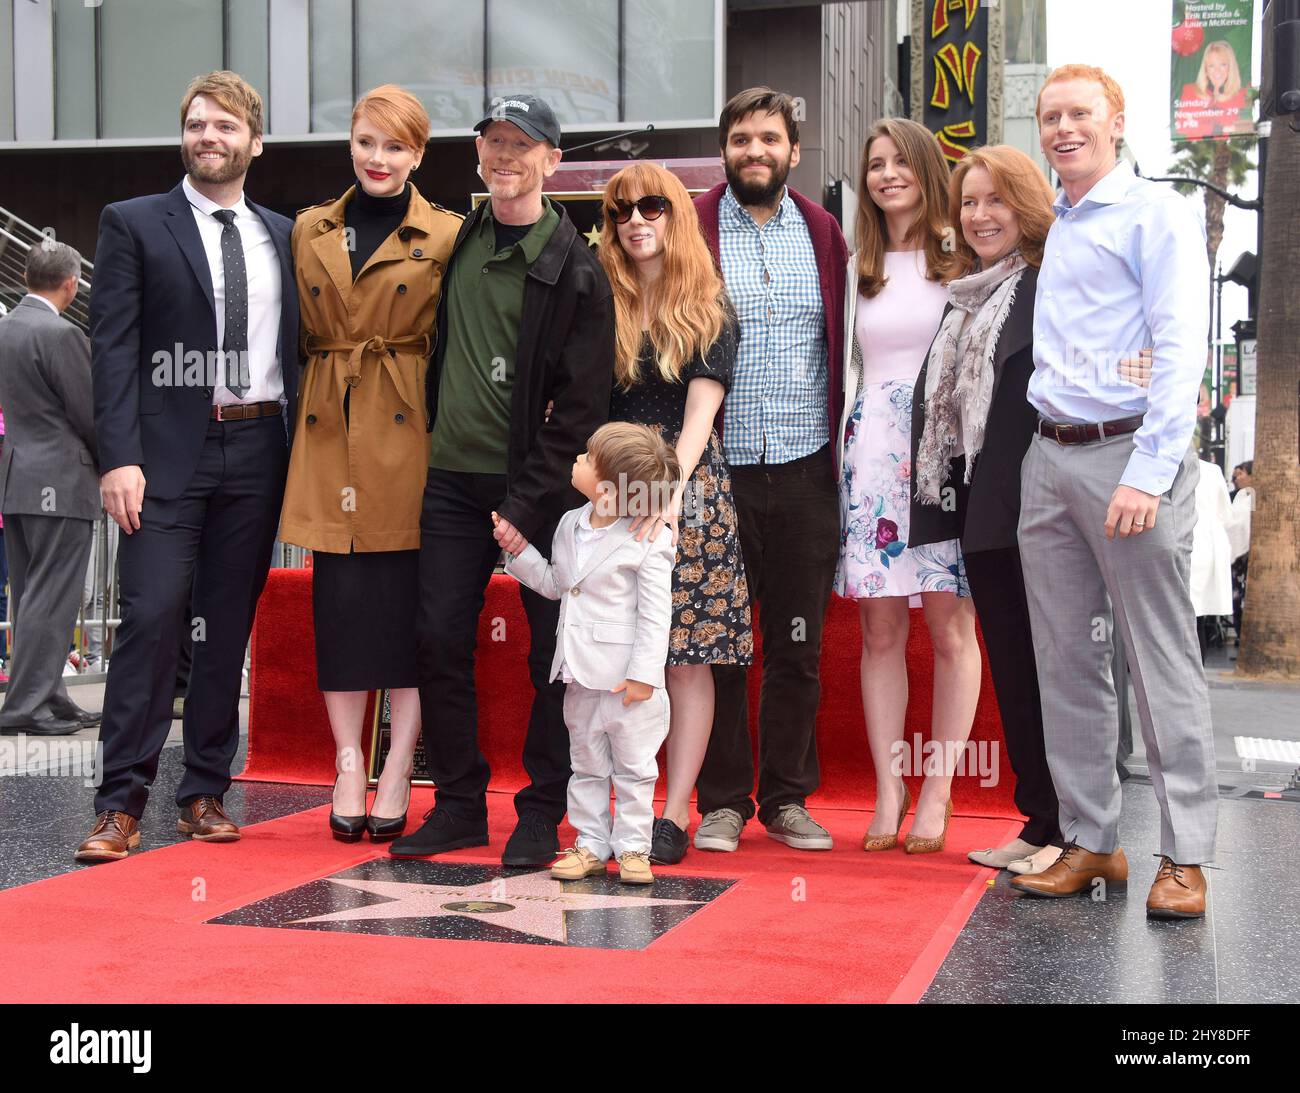 Seth Gabel, Bryce Dallas Howard, Ron Howard, Jocelyn Howard, Paige Howard, Cheryl Howard and Reed Howard attending the ceremony honouring Ron Howard with his 2nd star on the Hollywood Walk of Fame Stock Photo